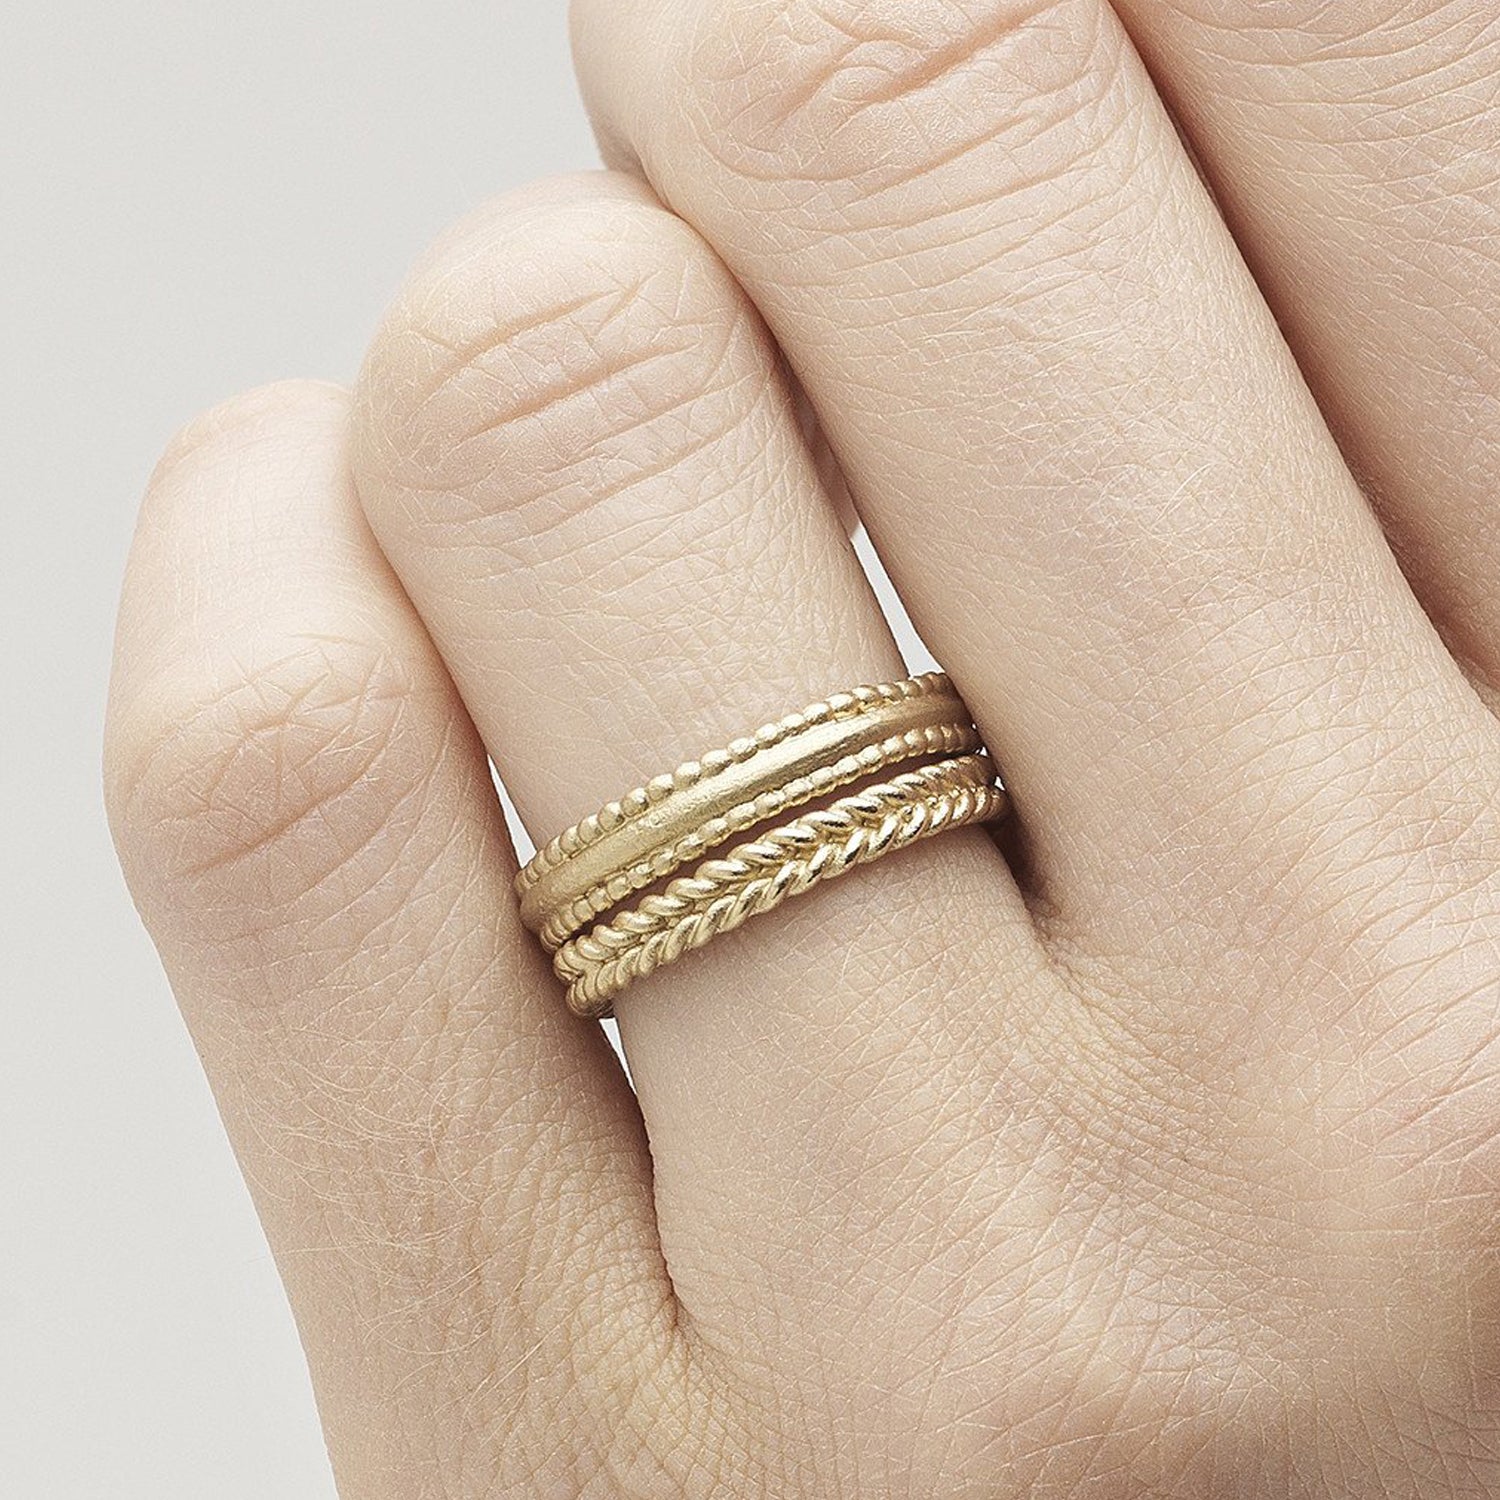 14ct brushed yellow gold Ruth Tomlinson beaded edge band ring stacked with plaited band ring. Alternative wedding band ring.